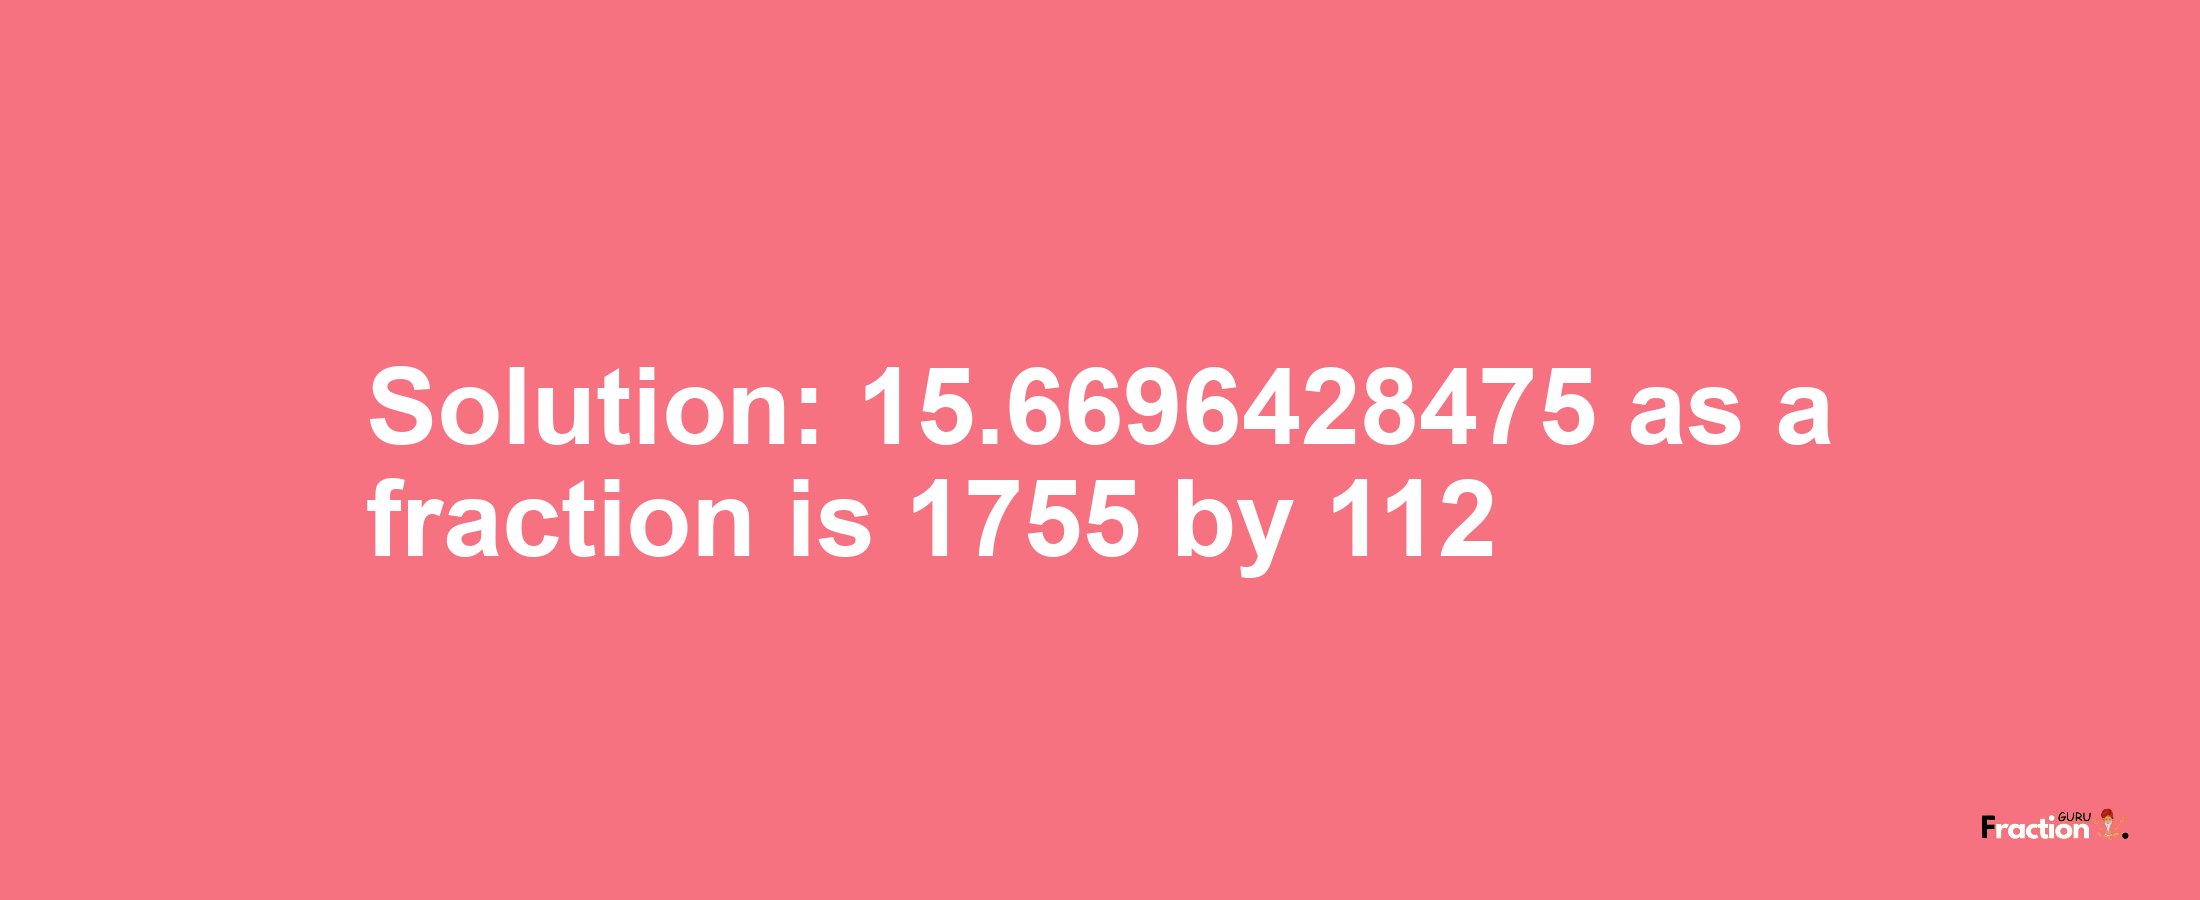 Solution:15.6696428475 as a fraction is 1755/112